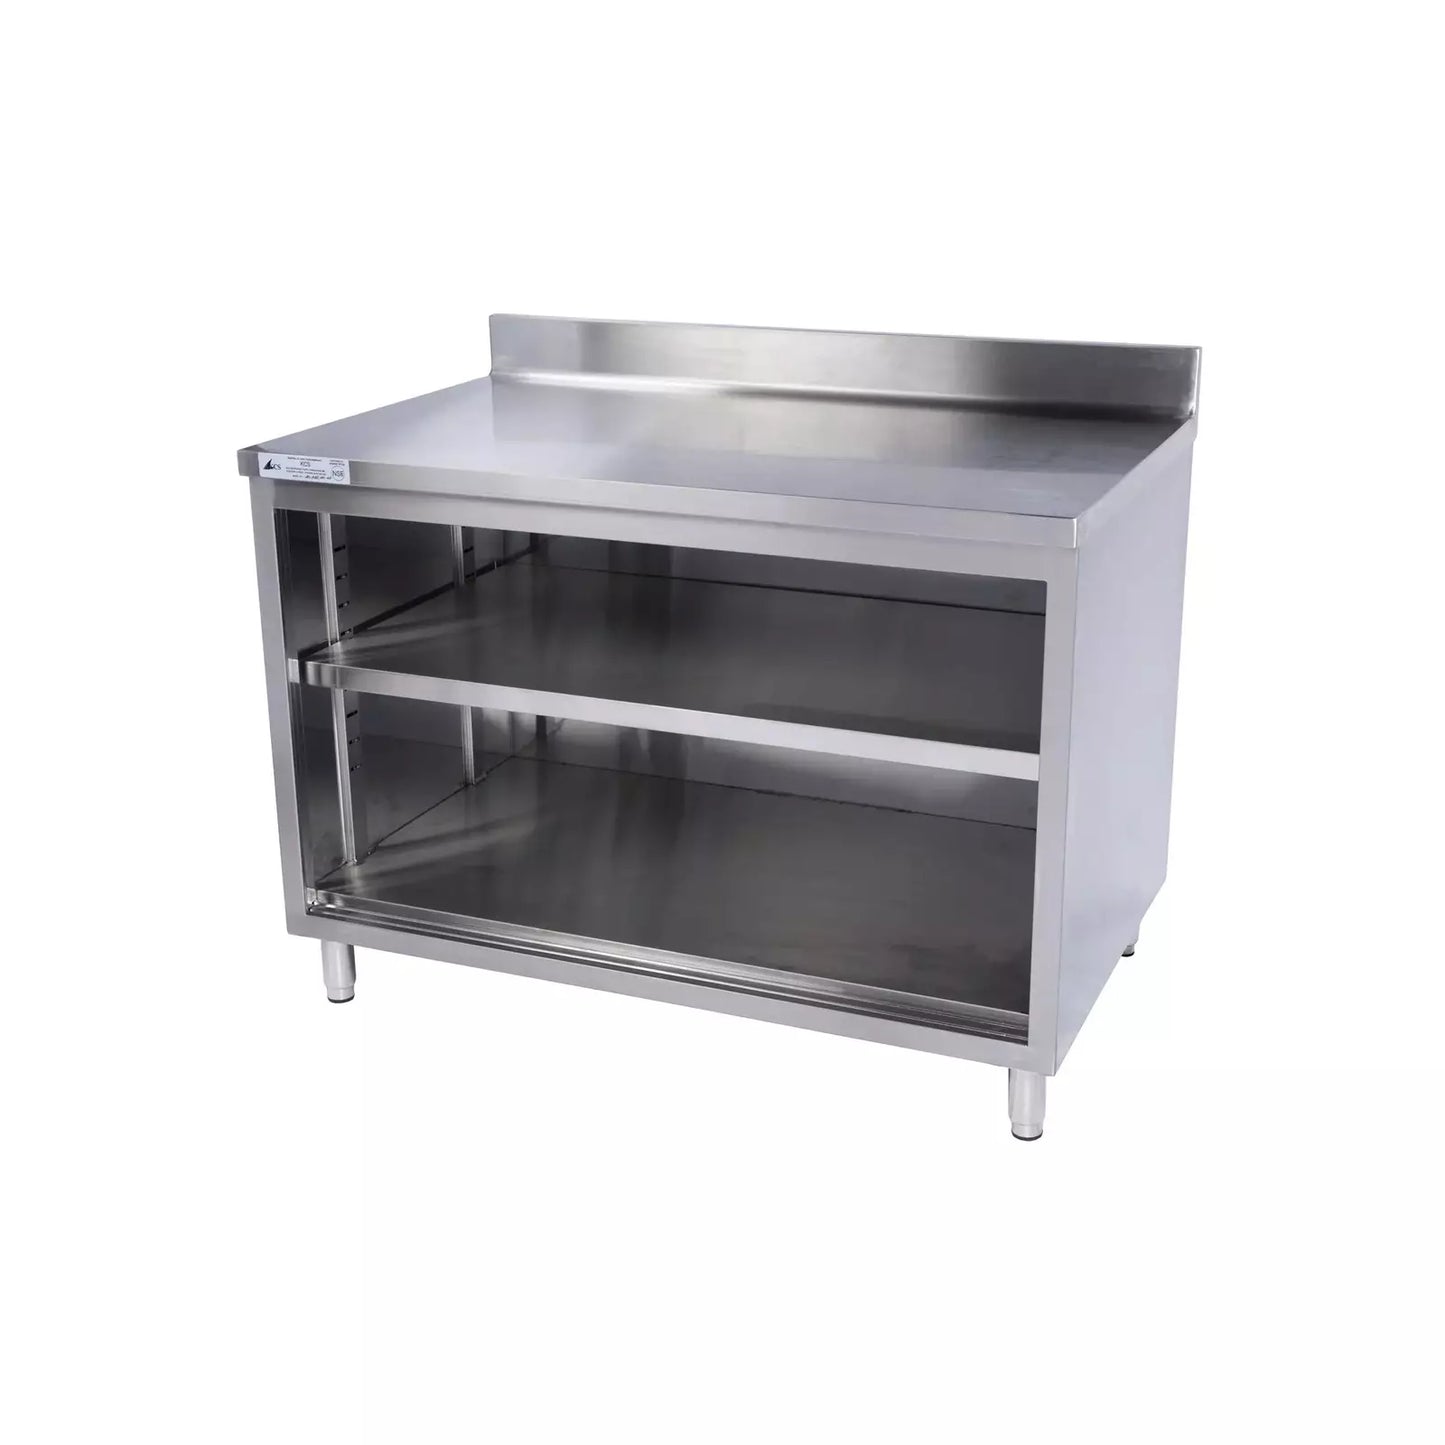 KCS CBS-2472-4BSWO 24" x 72" Stainless Steel Storage Welded Cabinet Open Front with 4" Backsplash